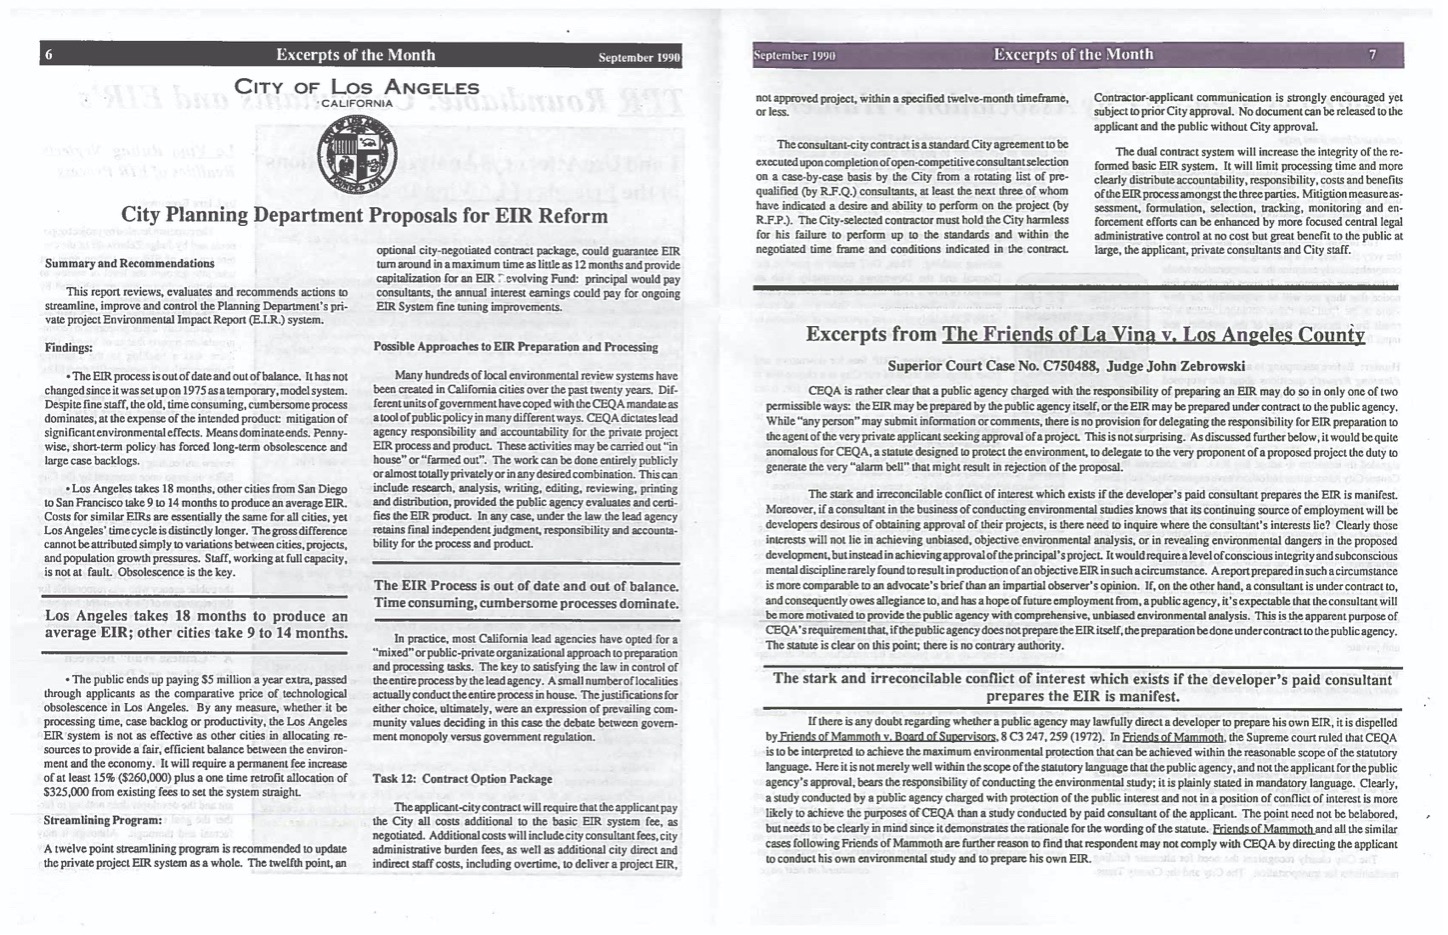 Excerpts pulled from the City Planning Department Proposals for EIR Reform and excerpts from The Friends of La Vina v. Los Angeles County  